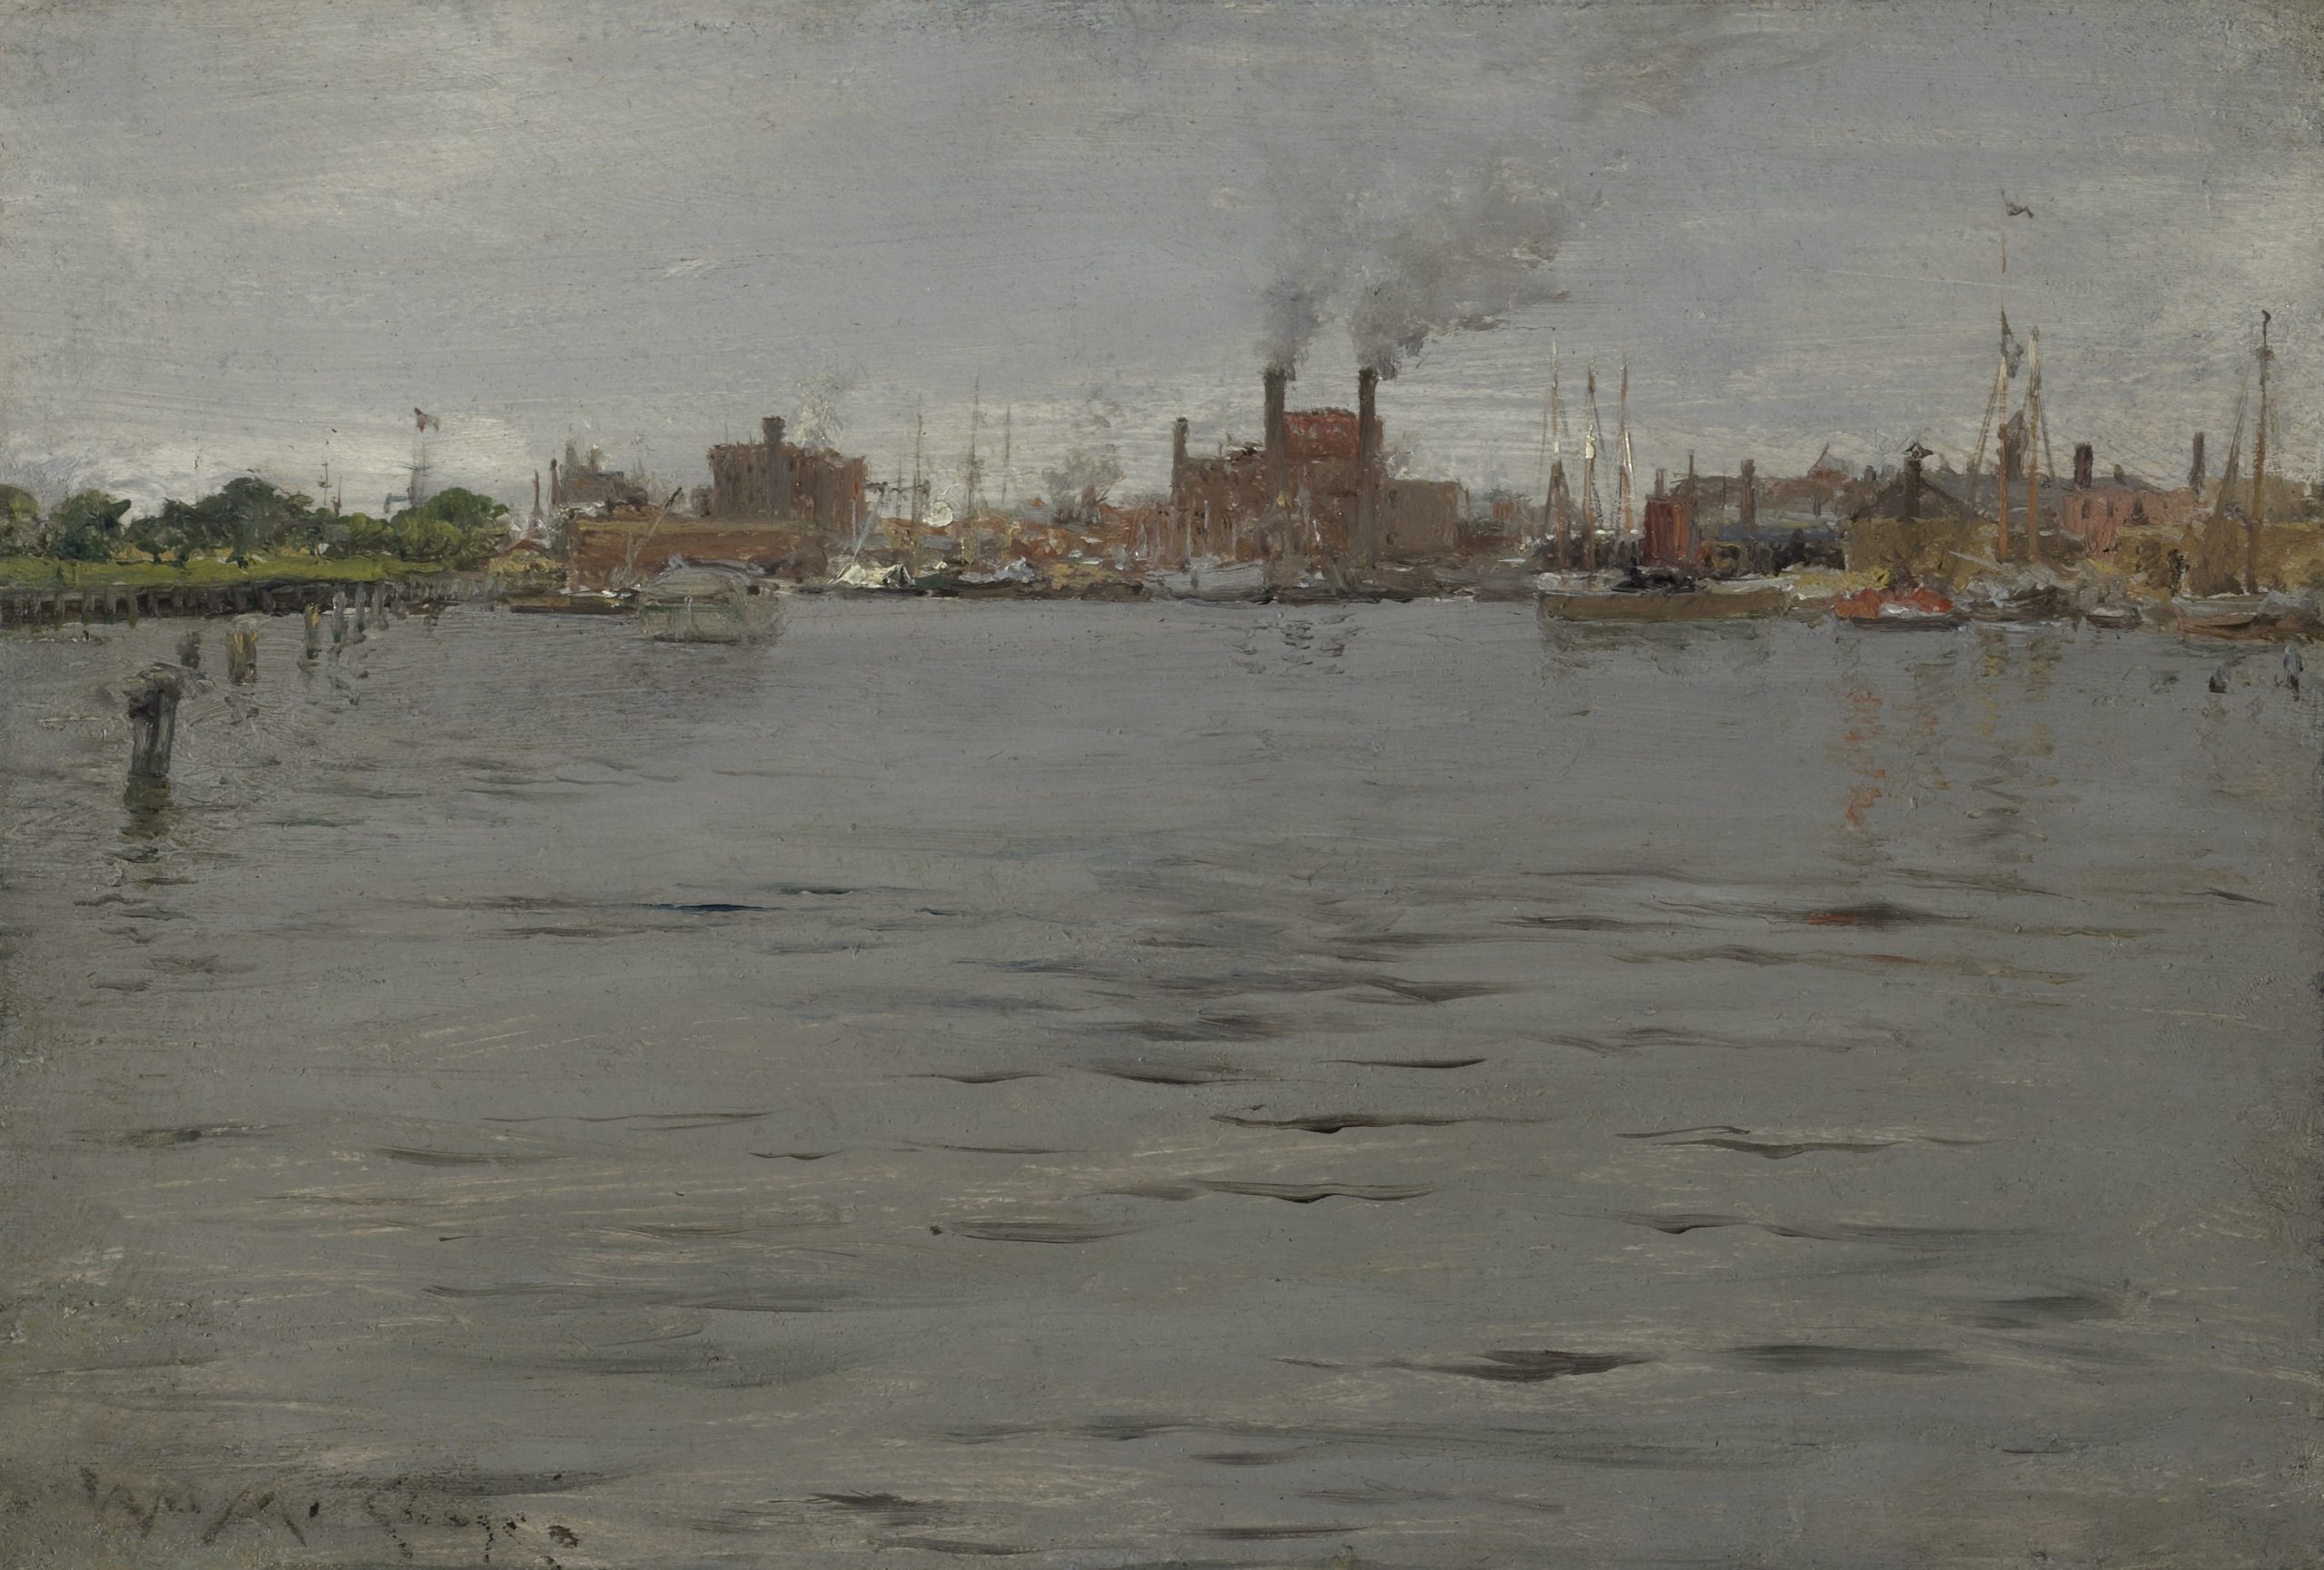 Impressionistic oil painting of an industrial city seen across a gray body of water. Smoke coming out of the chimneys merges with the gray sky.